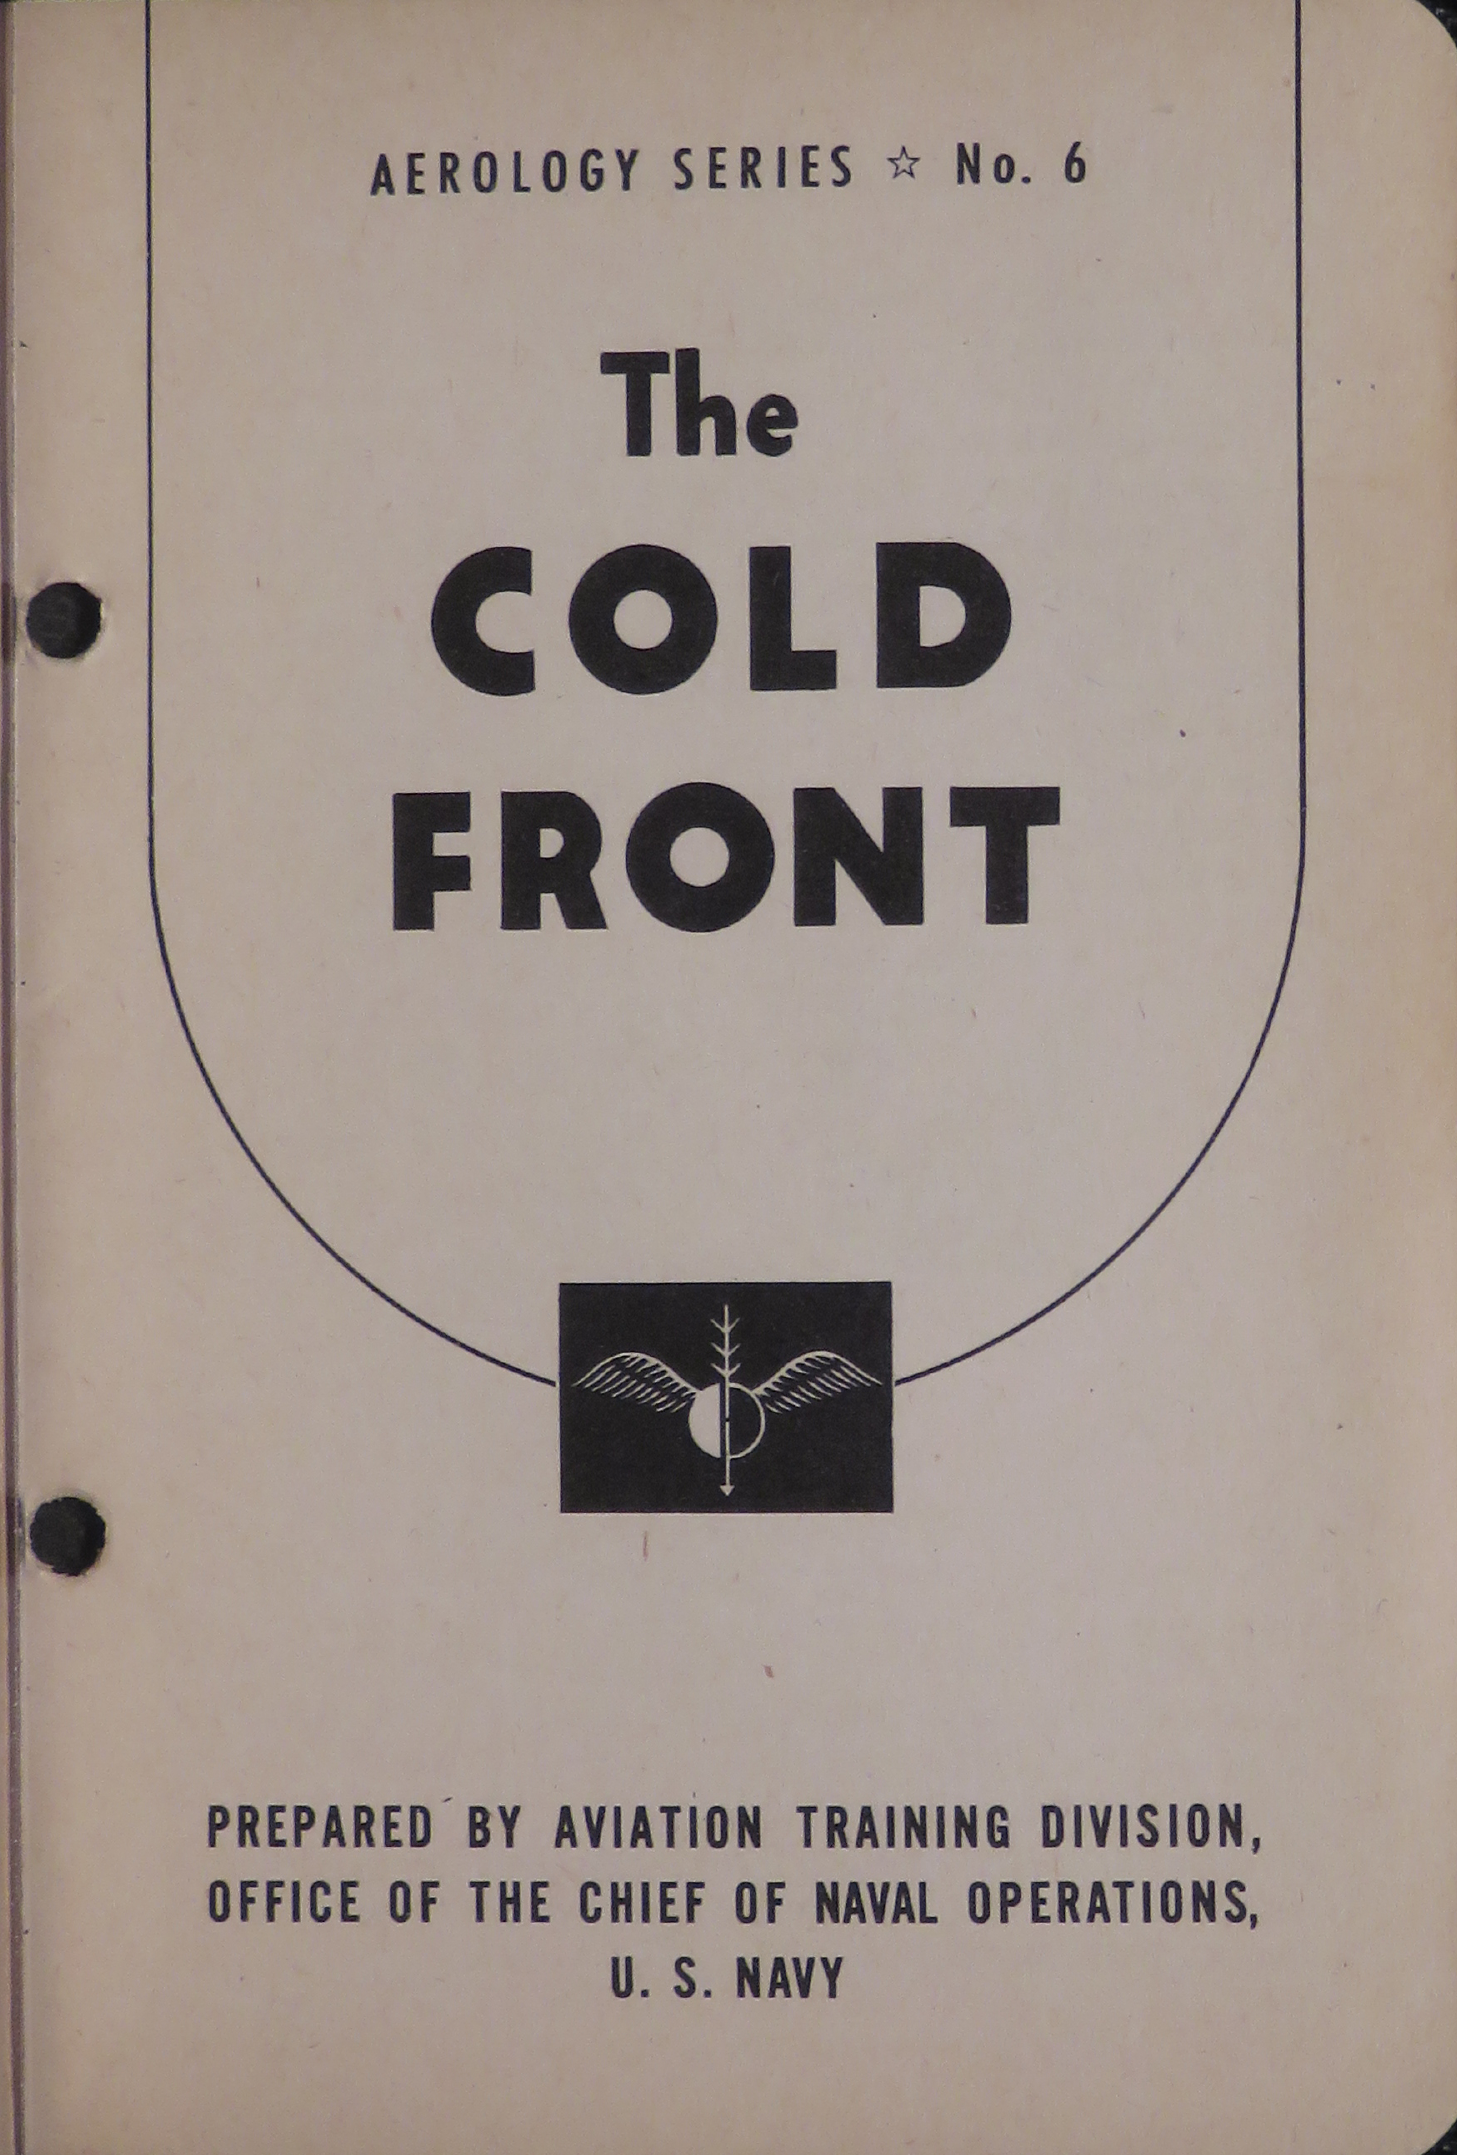 Sample page 3 from AirCorps Library document: Aerology Series No. 6; The Cold Front